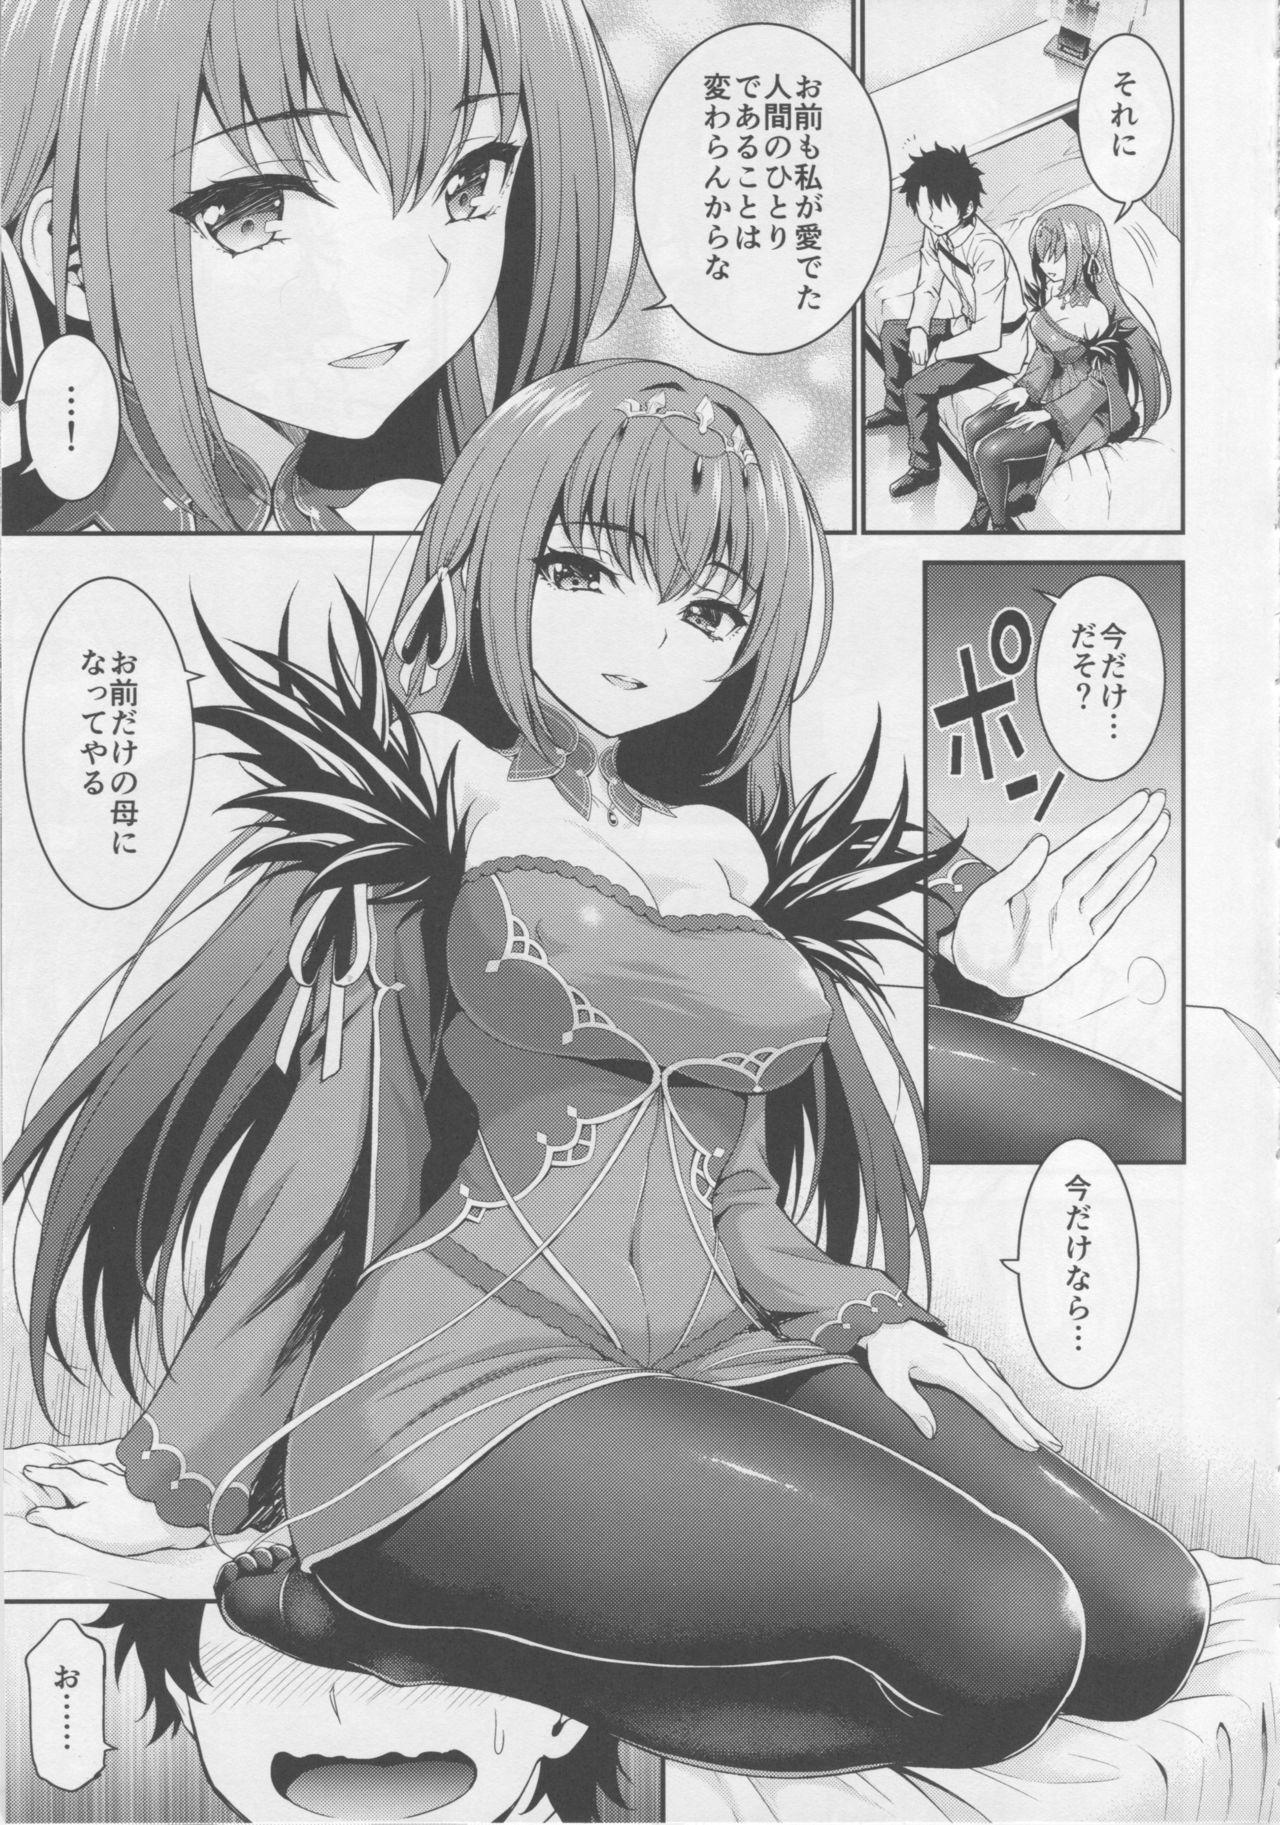 Spy Camera Scathaha Play - Fate grand order Camsex - Page 6